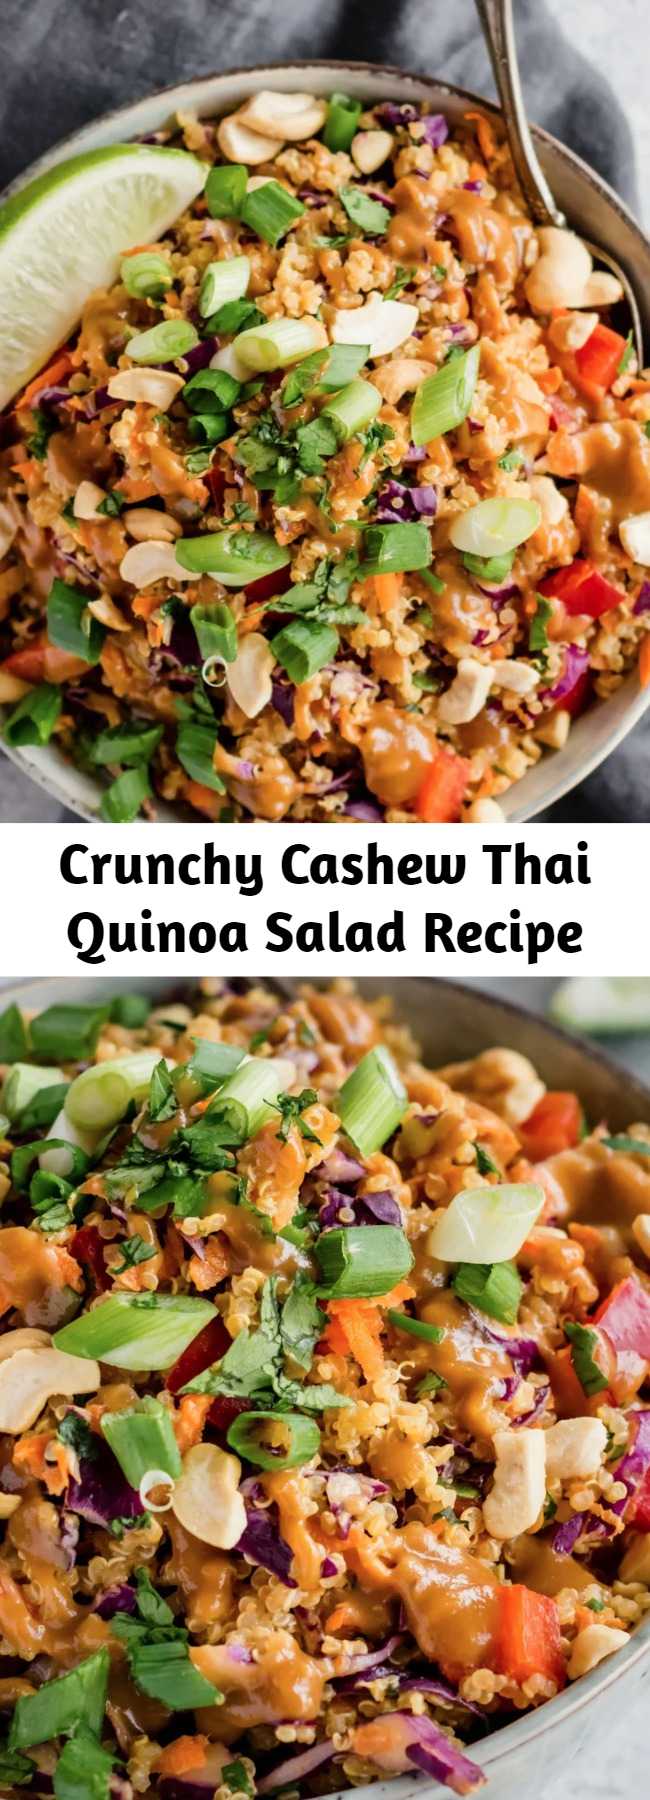 Crunchy Cashew Thai Quinoa Salad Recipe - Delicious vegan and easily gluten-free salad with Thai flavors and a perfect crunch. It's even better the next day! #veganrecipe #veganfood #thaifood #vegetarian #plantbased #healthylunch #lunchideas #mealprep #mealprepping #glutenfree #glutenfreerecipes